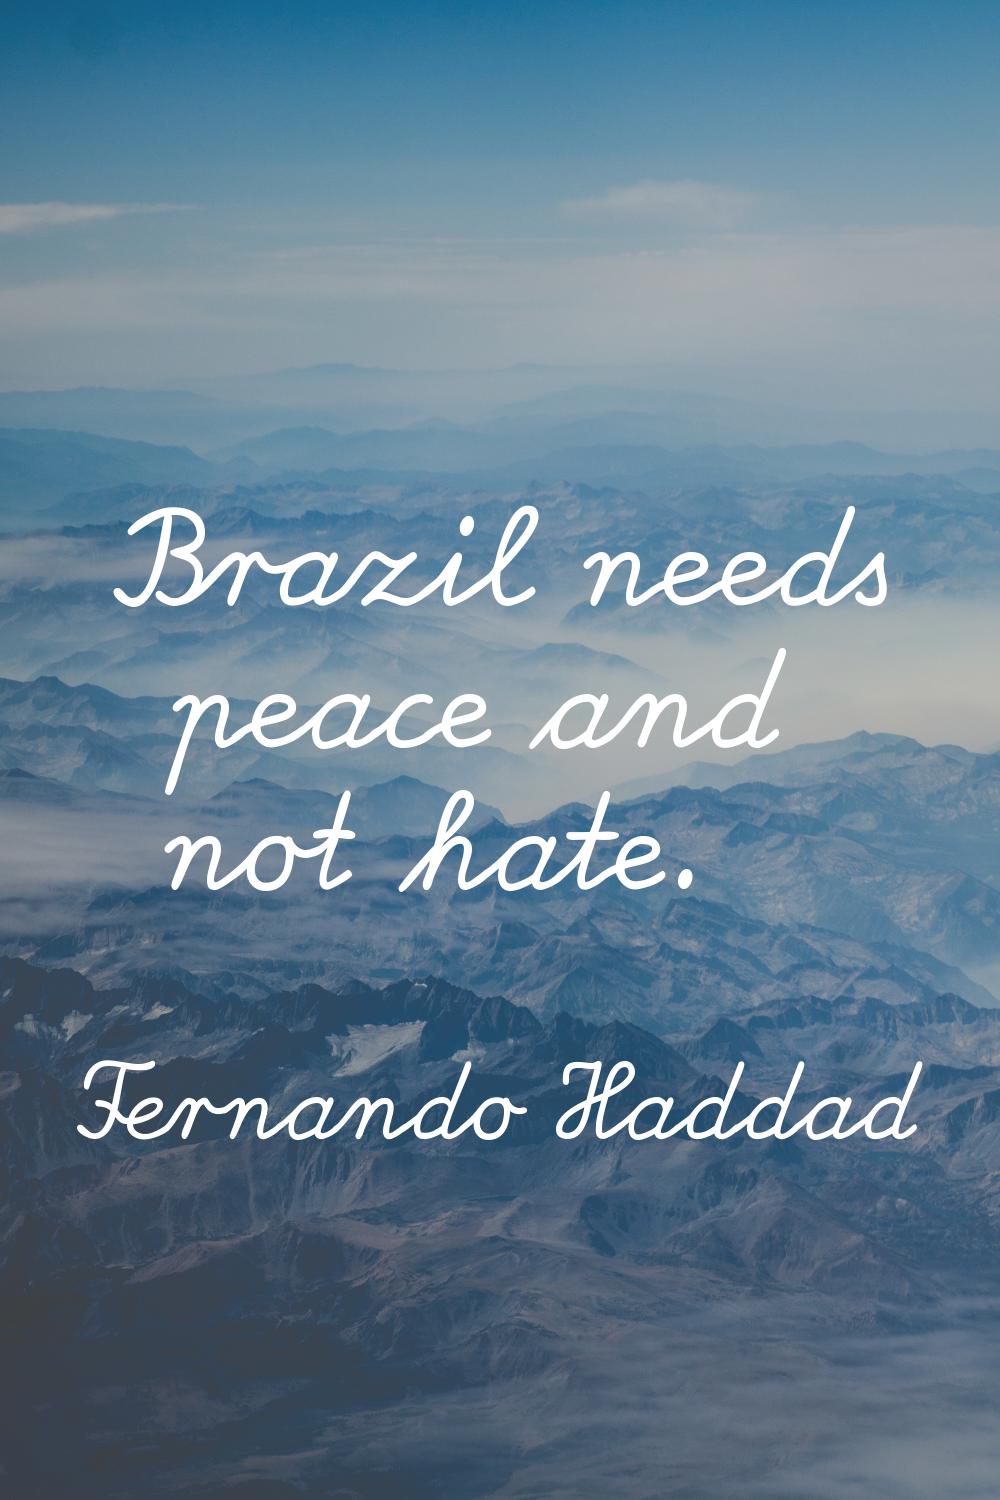 Brazil needs peace and not hate.